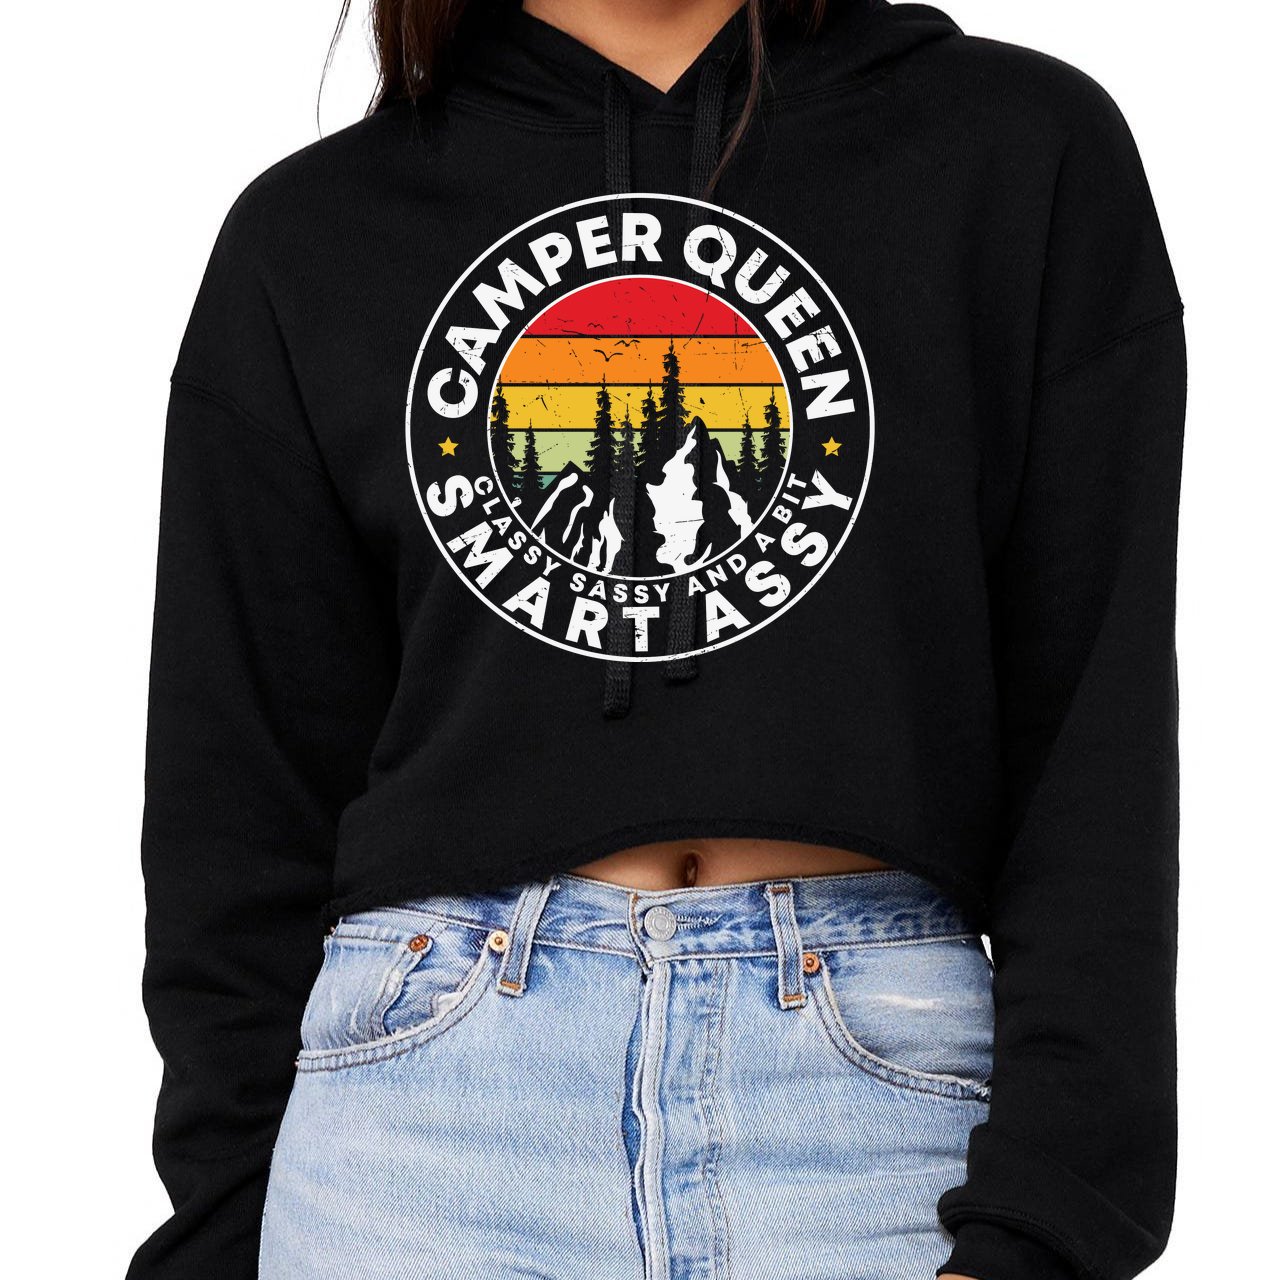 Camper Queen Smart Assy , Classy Sassy And A Bit Logo Camping Crop Top  Hoodie